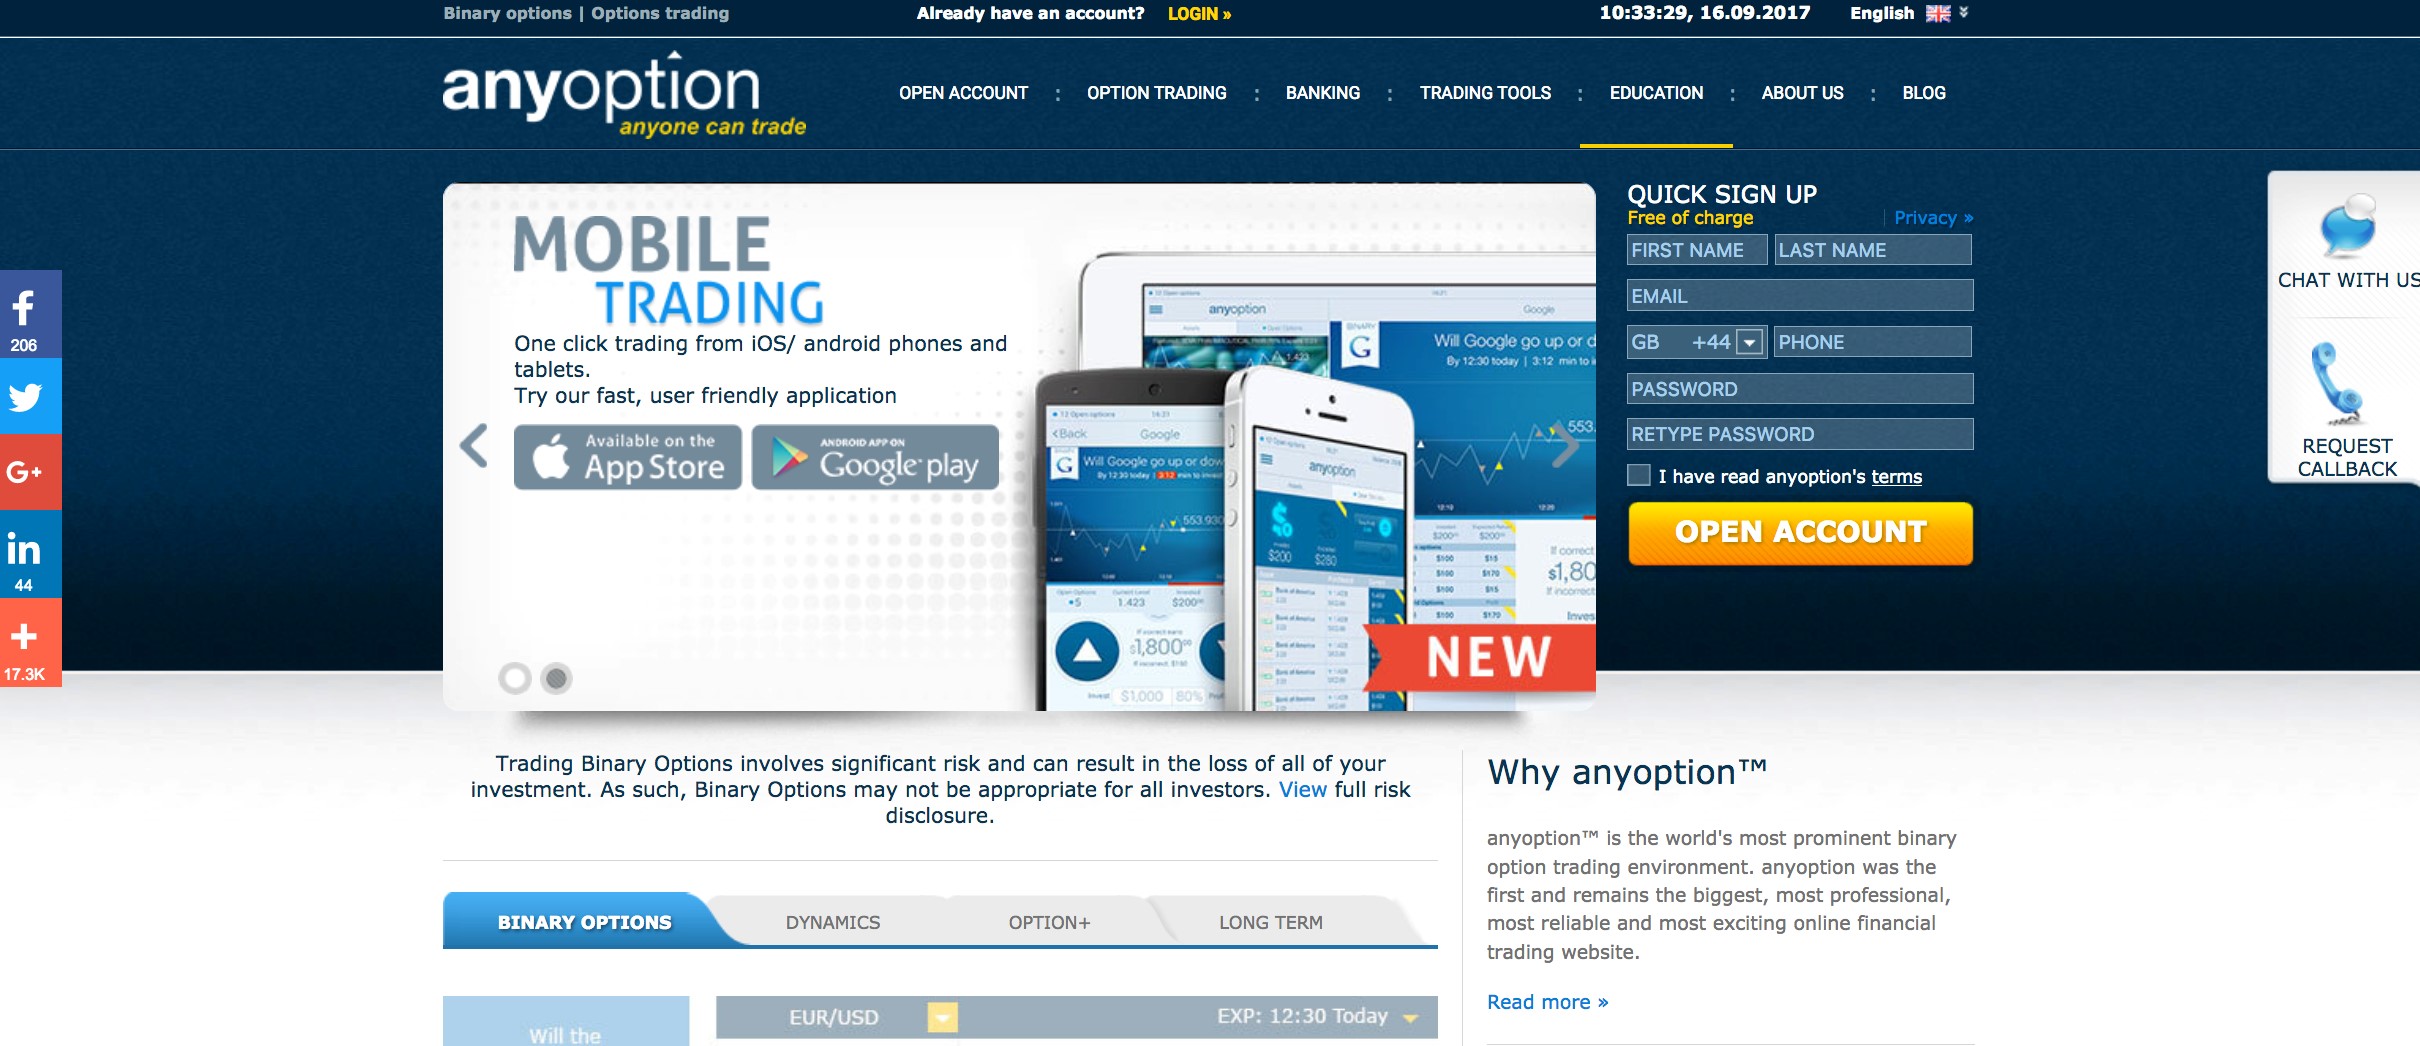 Are there any honest binary options brokers